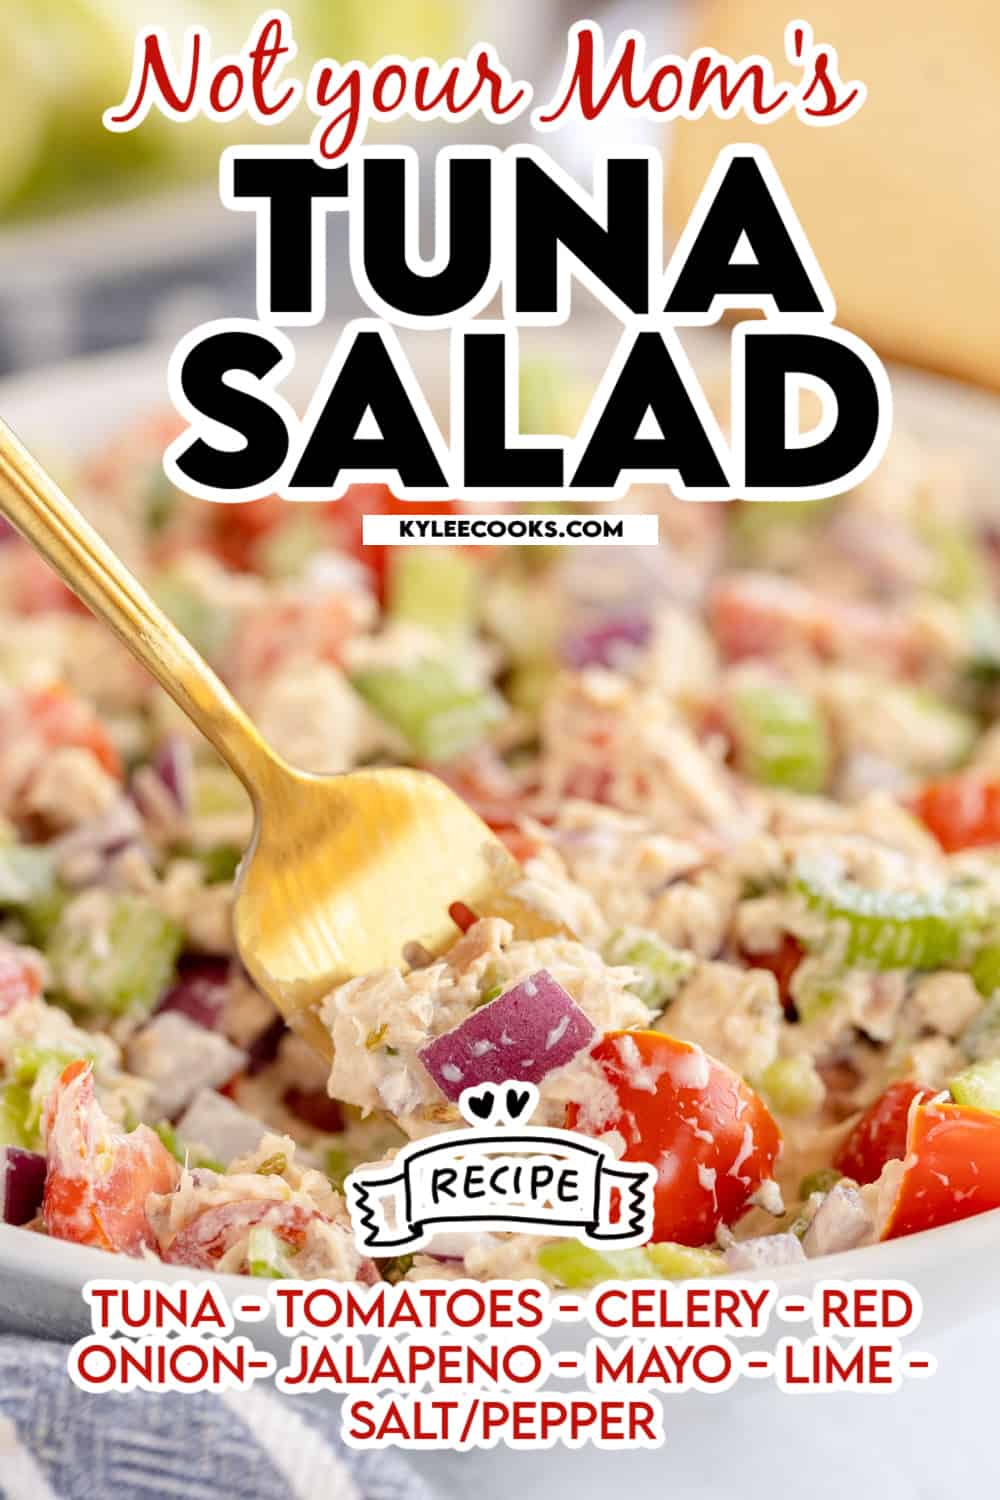 tuna salad in a bowl with recipe name and ingredients overlaid in text.